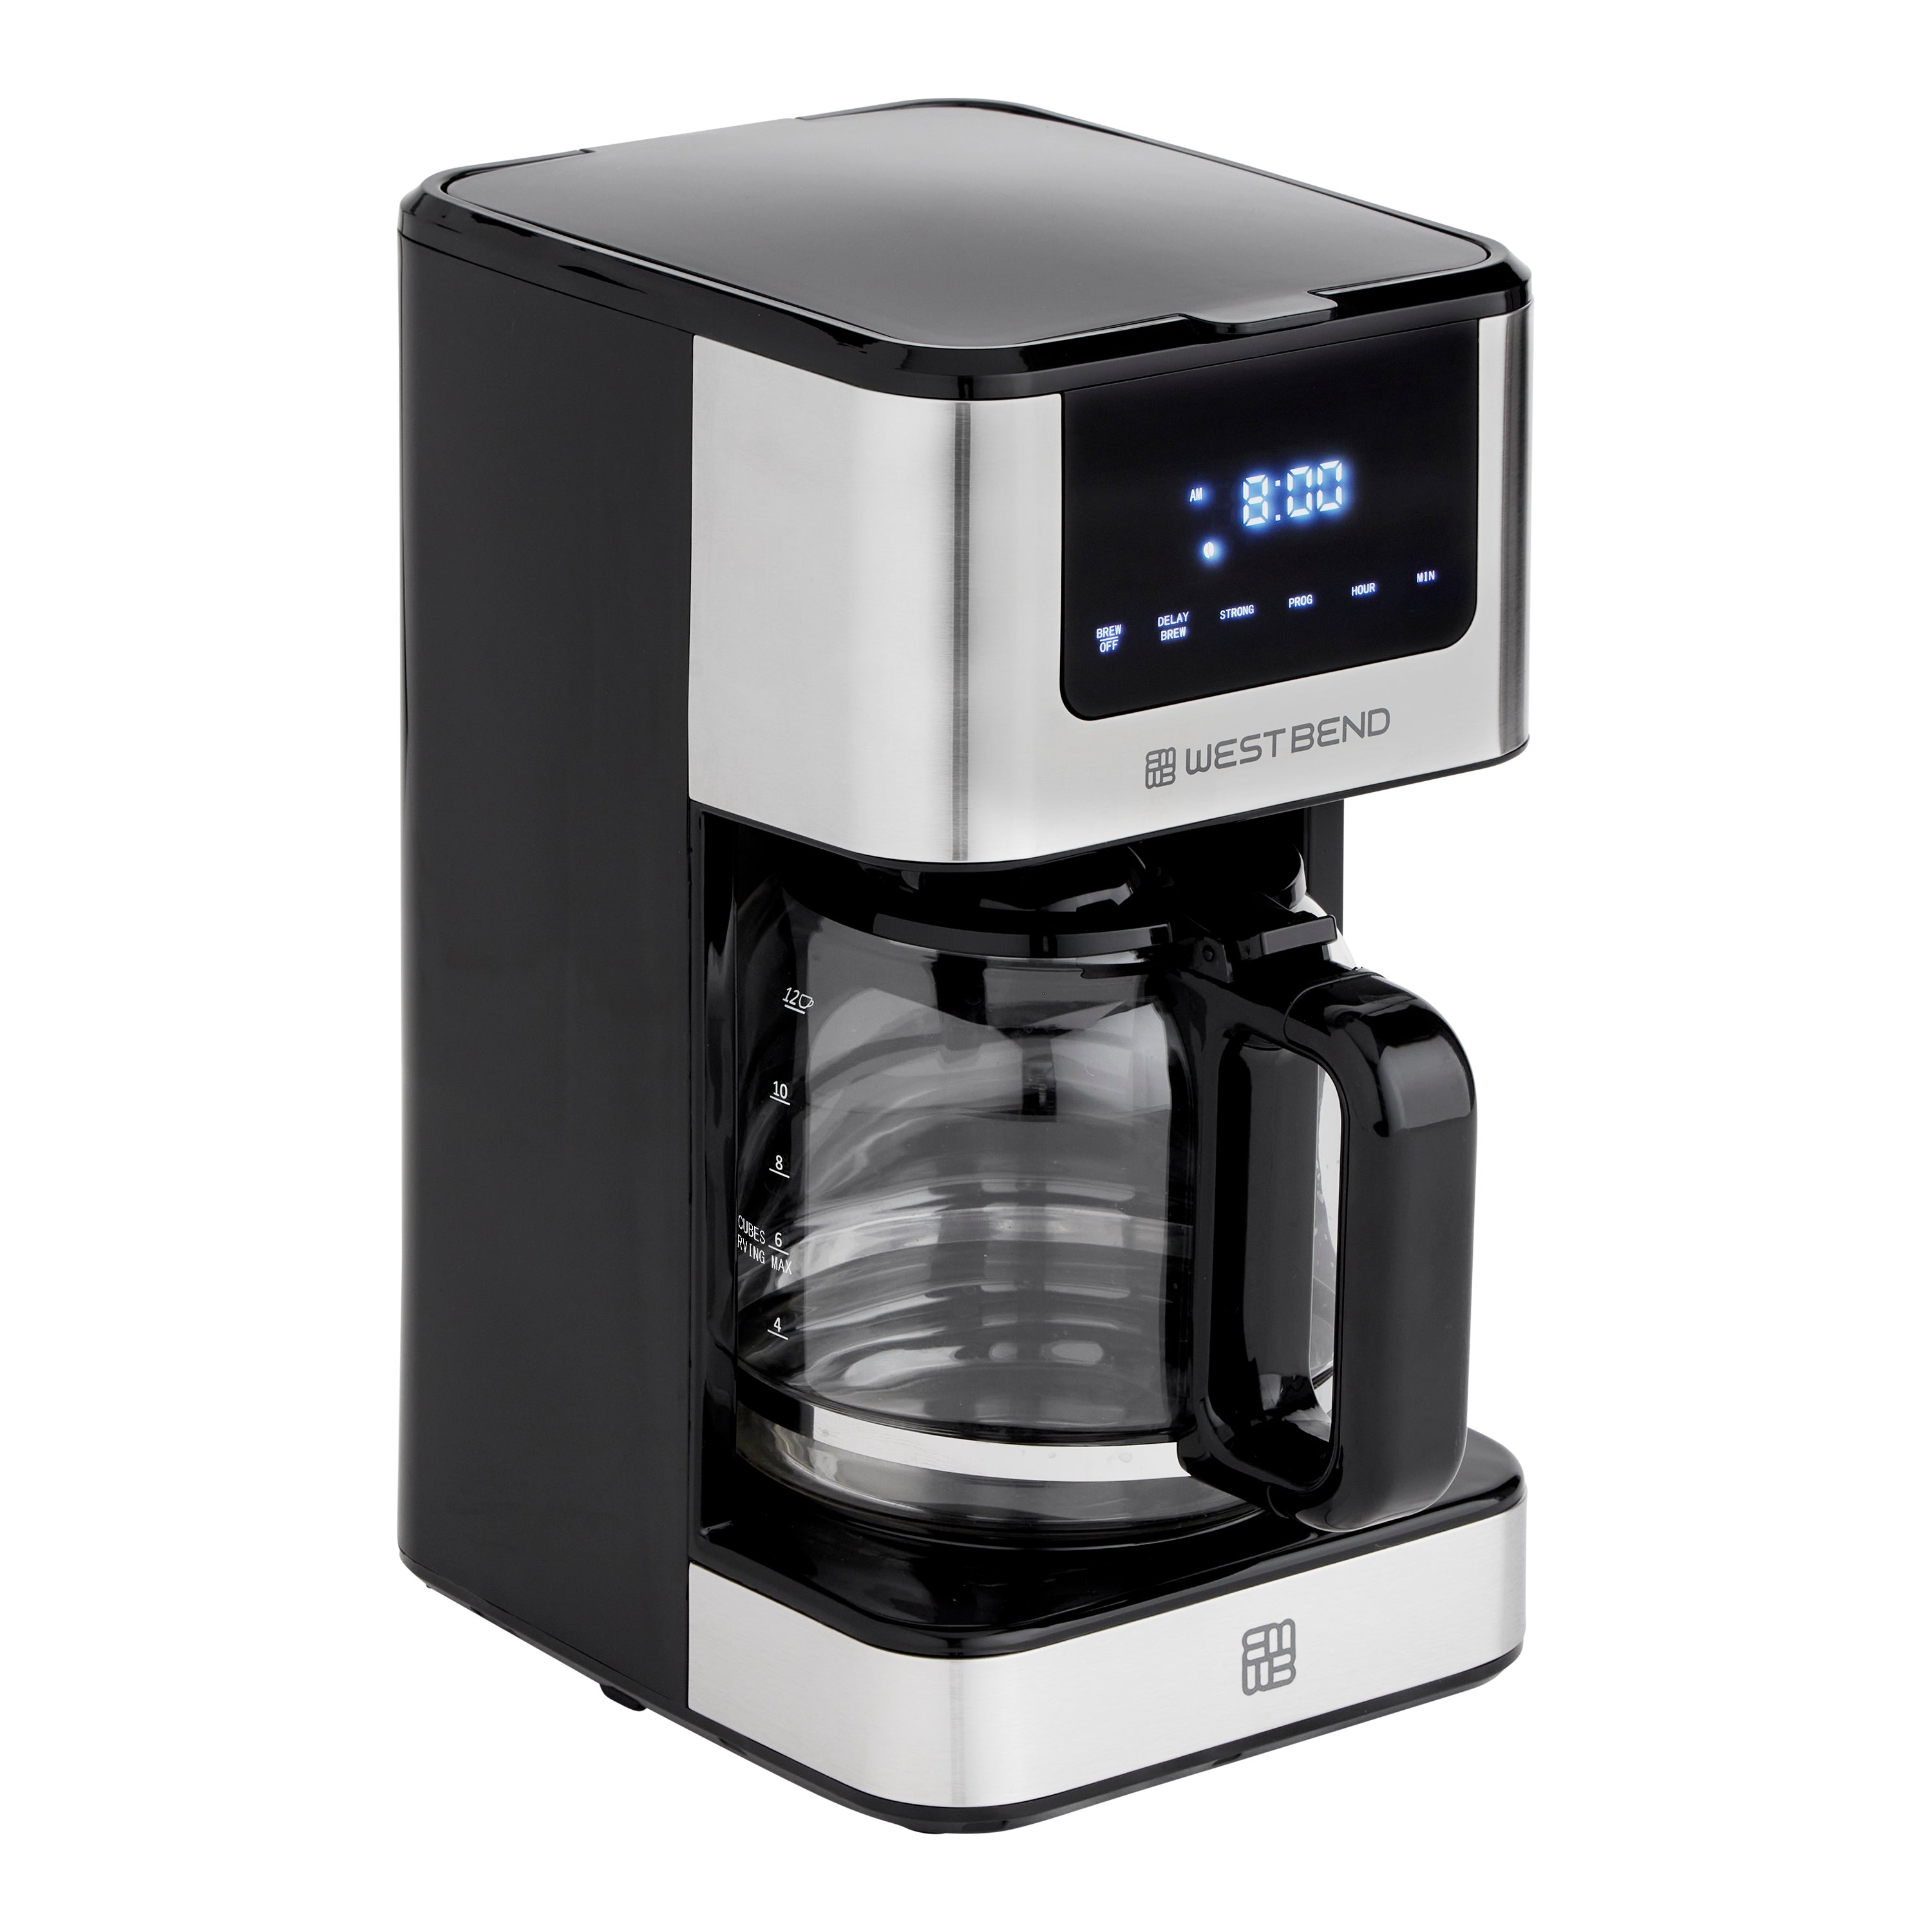 West Bend Iced Tea and Iced Coffee Maker, Silver, (IT500)